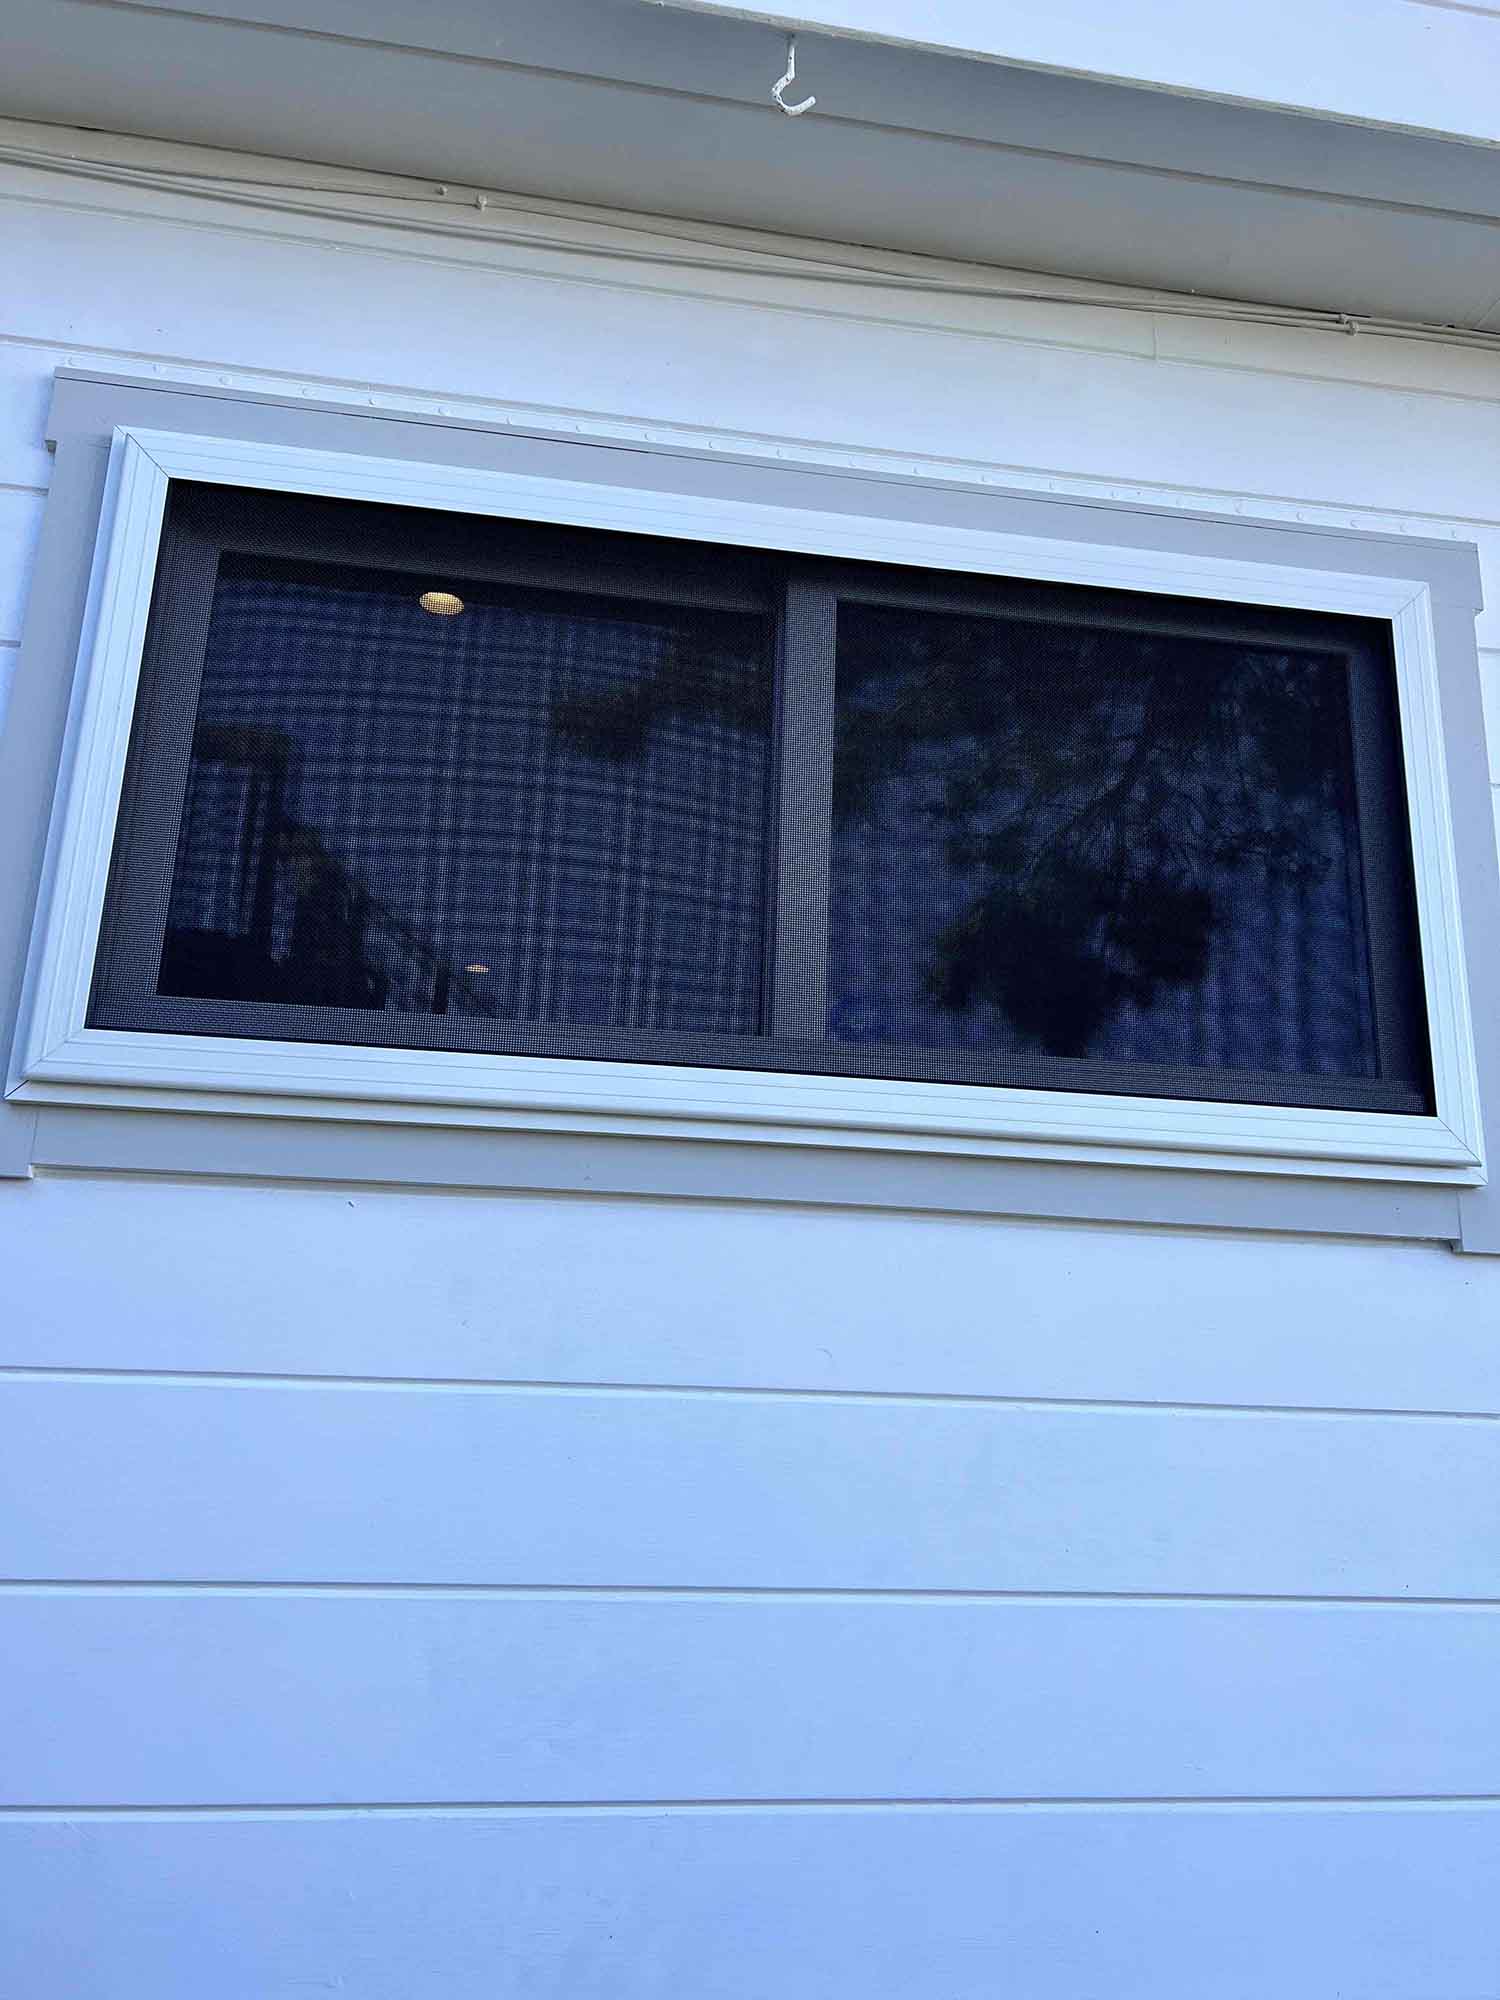 Crimsafe Window and Door Security Screens, installed by ClimatePro in San Francisco